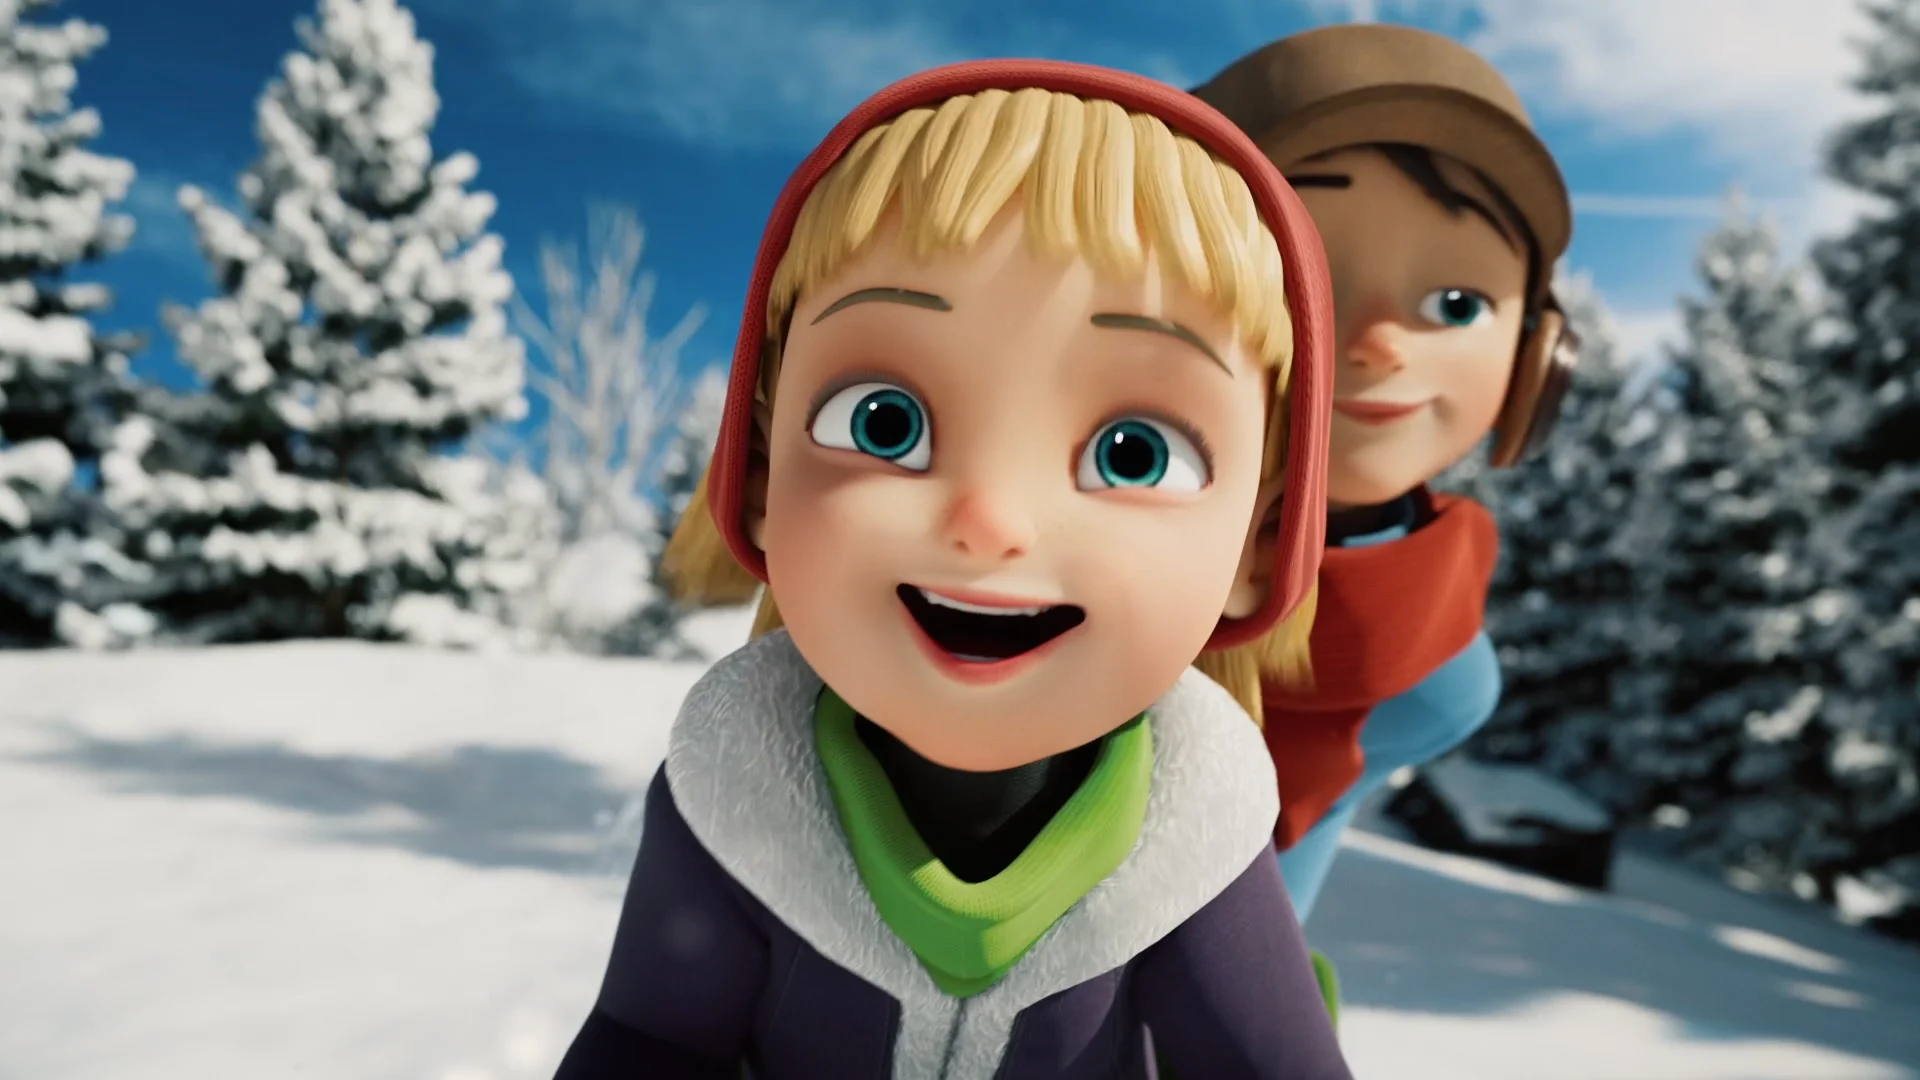 two cartoon characters (a boy and a girl) in a wintery landscape with snow on the ground and on the trees. she is smiling and he is looking annoyed